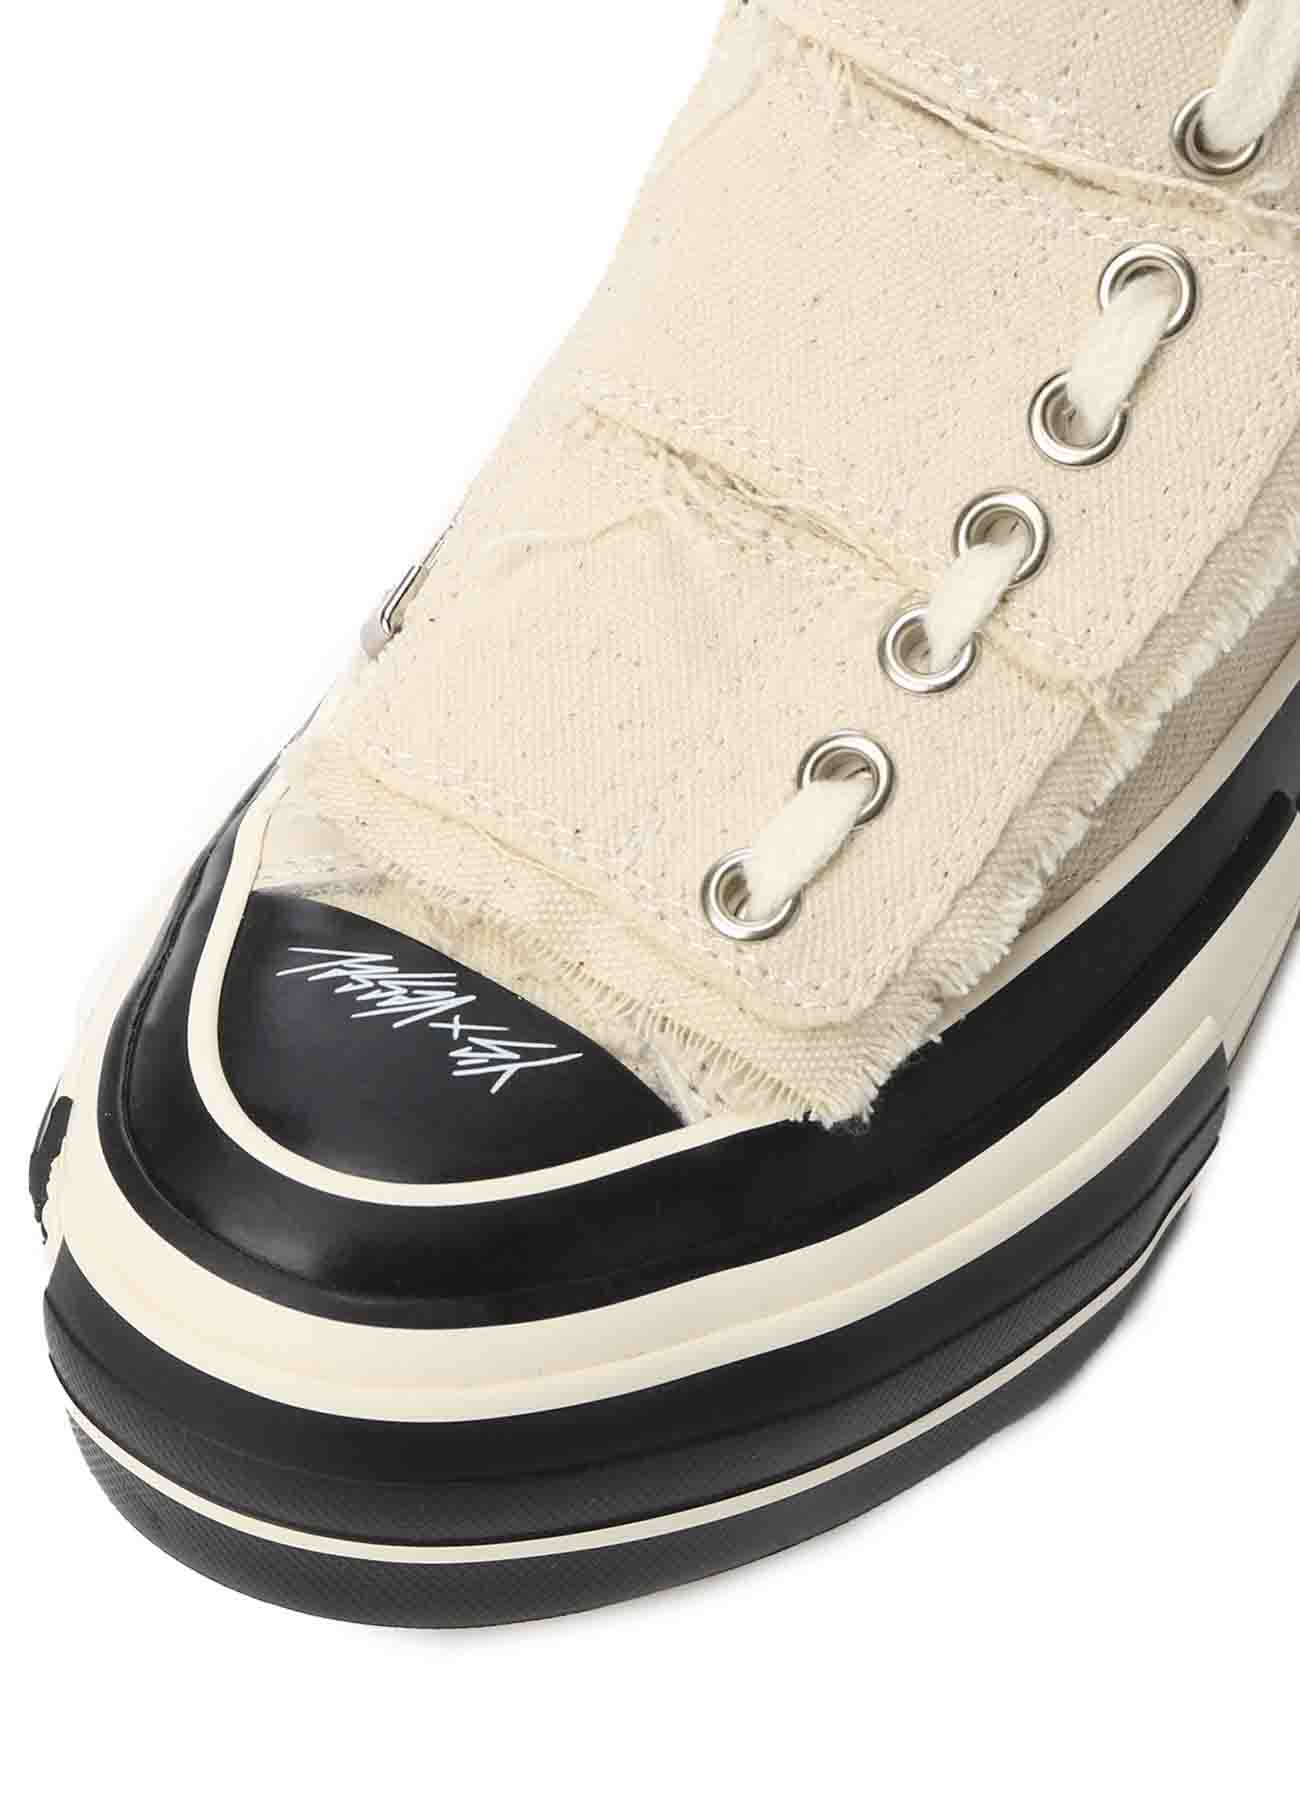 Y's × xVessel HIGH-CUT SNEAKERS(22.5cm WHITE): Vintage 1.1｜THE 